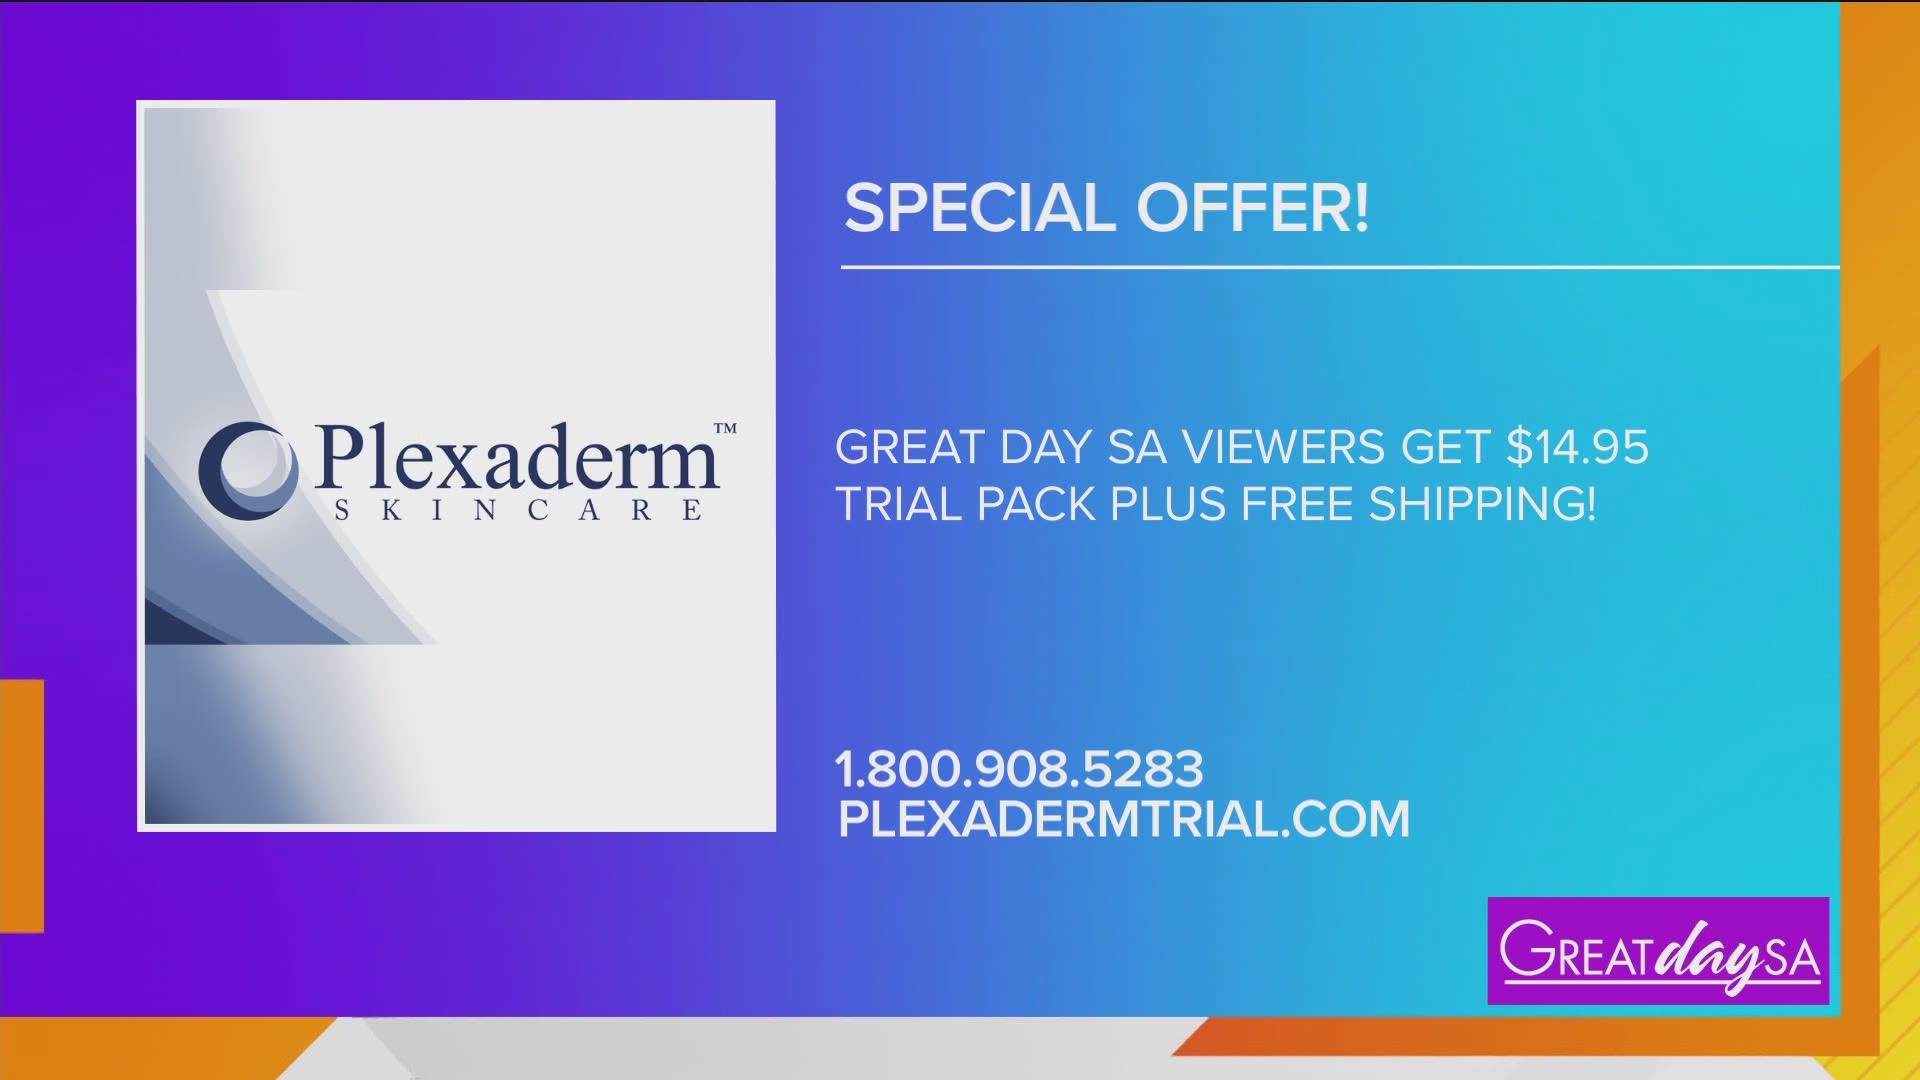 If you're looking for something new to add to your at-home beauty routine, Plexaderm hasa 10-minute challenge you may want to try.